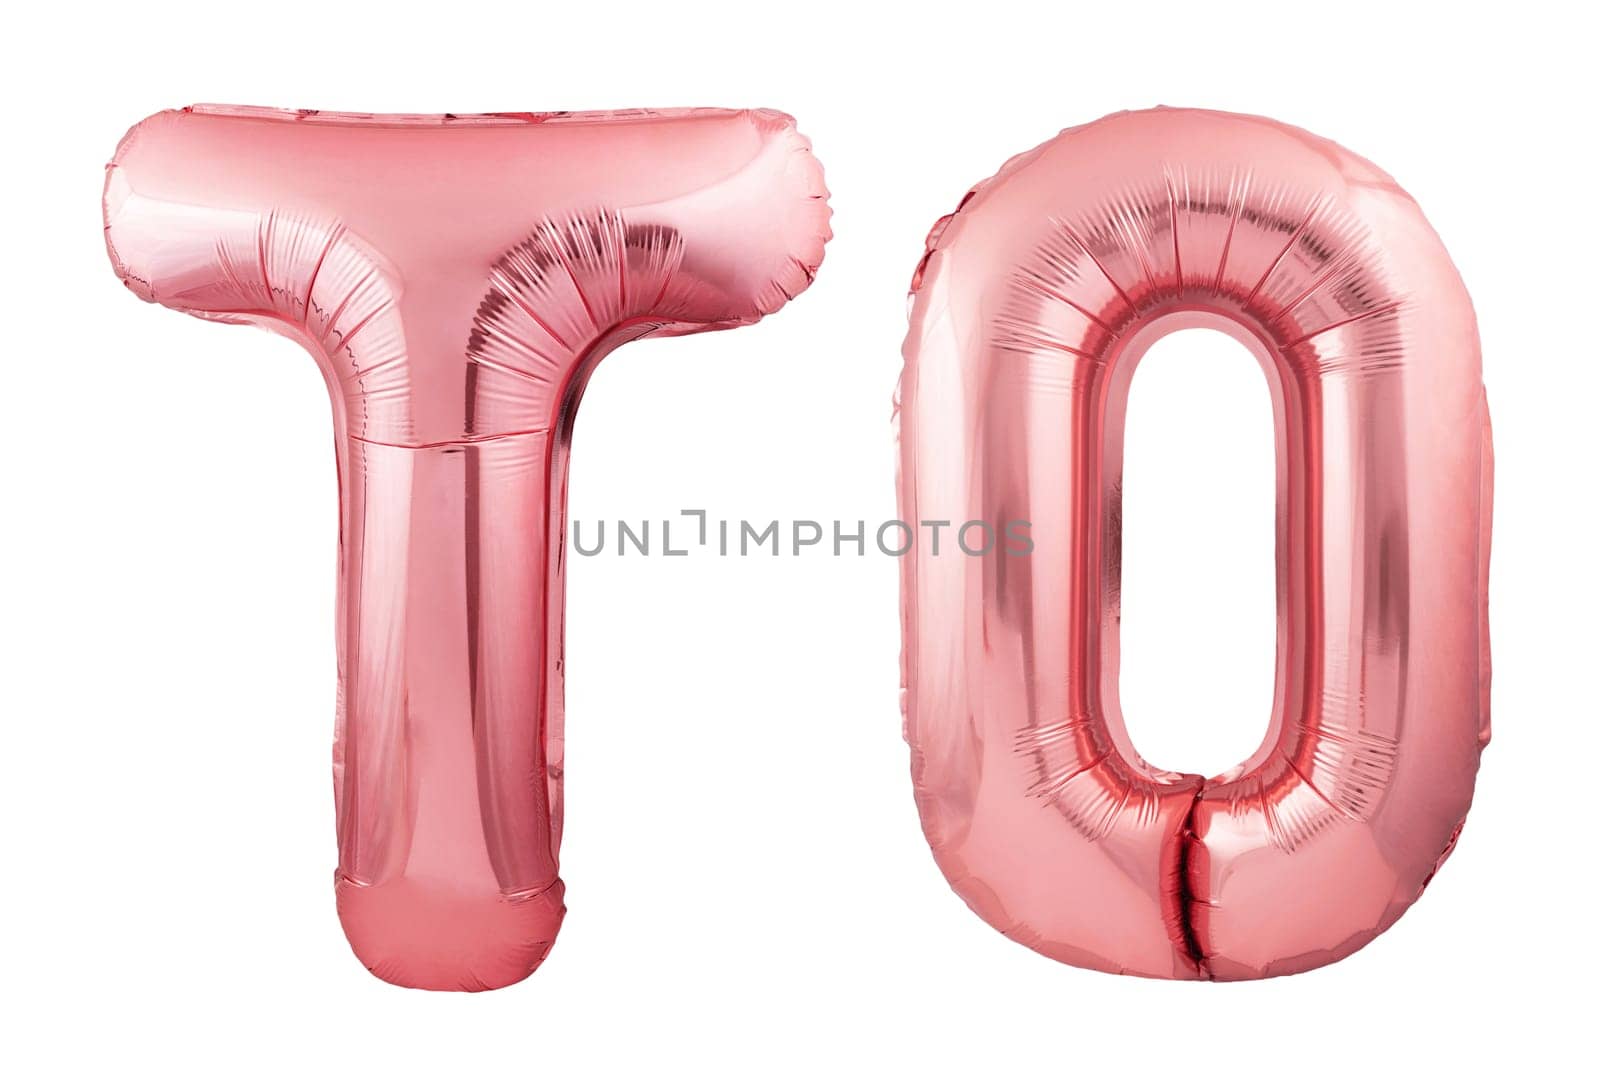 Words summer time made of colorful inflatable balloon letters isolated on white background by dmitryz